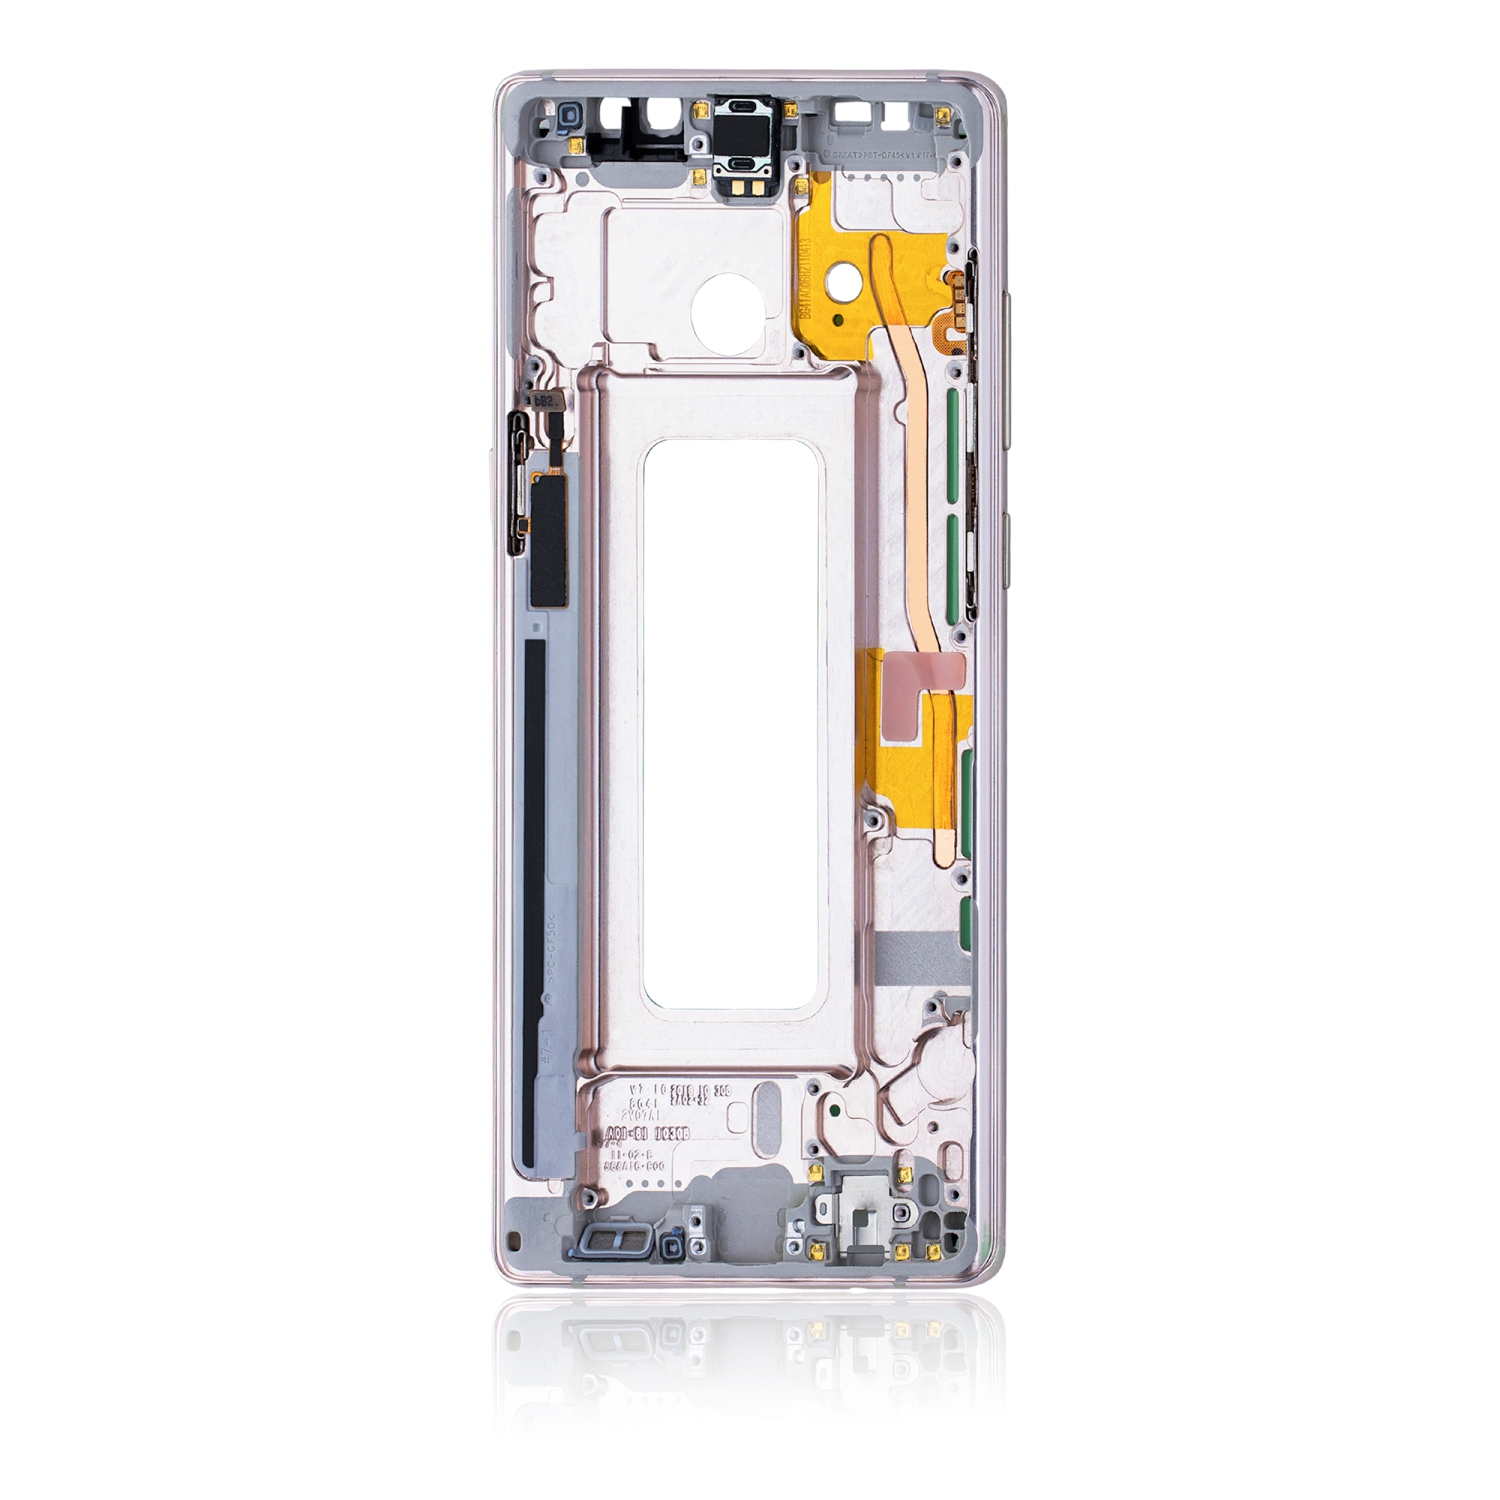 Replacement Mid-Frame Housing Compatible For Samsung Galaxy Note 8 (With Small Parts) (Gold)